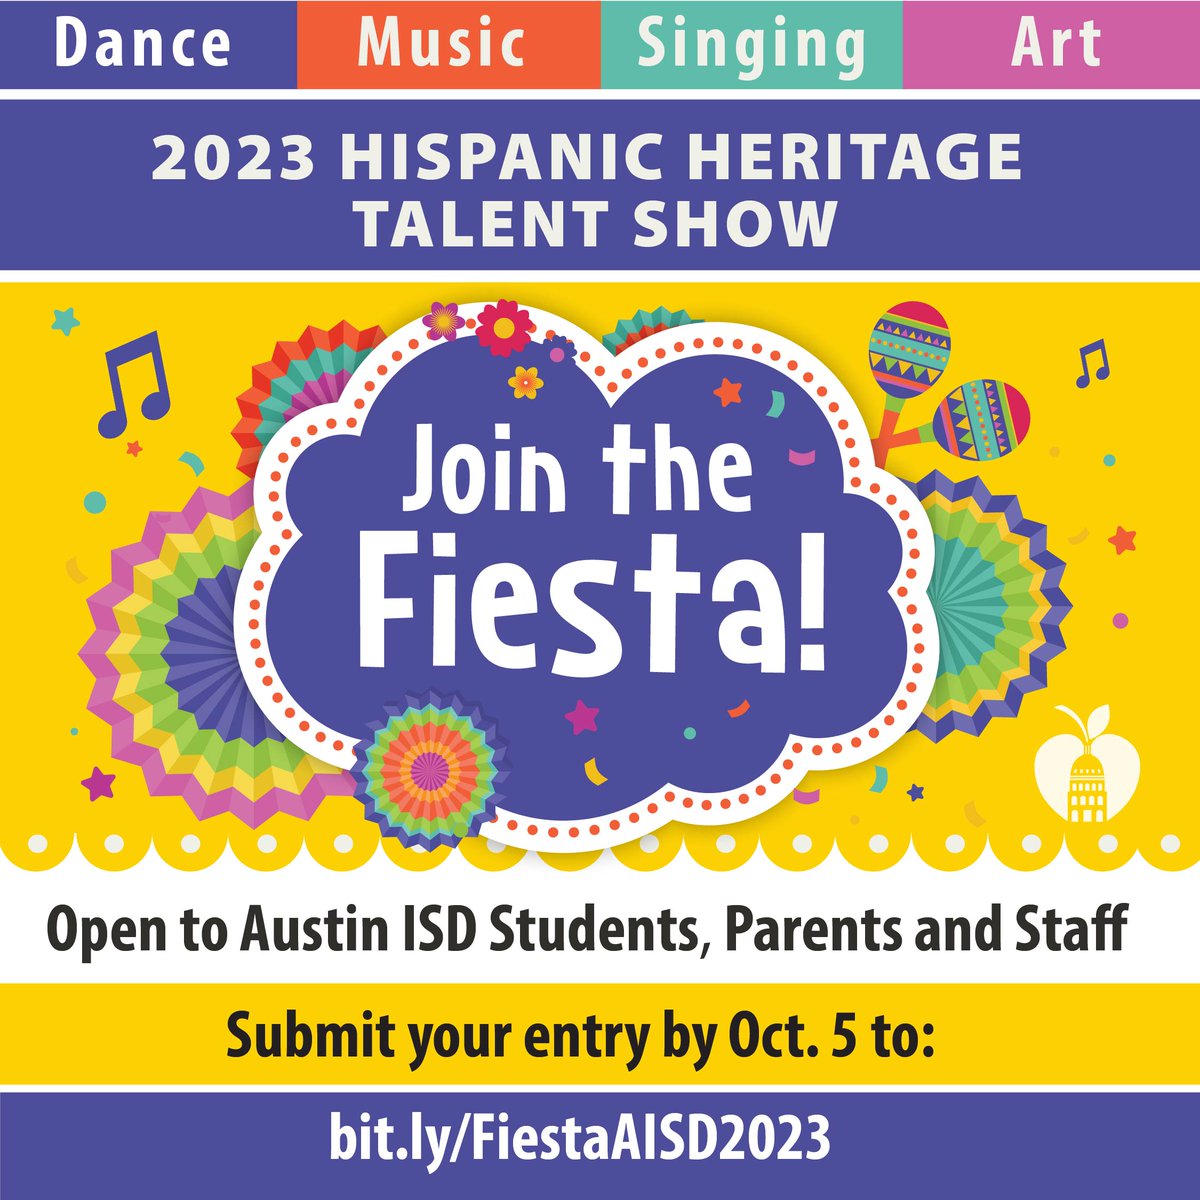 2023 Hispanic Heritage Talent Show “Join the Fiesta” Open to Austin ISD students, parents and staff. Talent Categories: Dance, Music, Singing and Art that celebrate Hispanic culture (English or Spanish) Participant Categories: PK-5 students, 6-12 students, Class Performance,